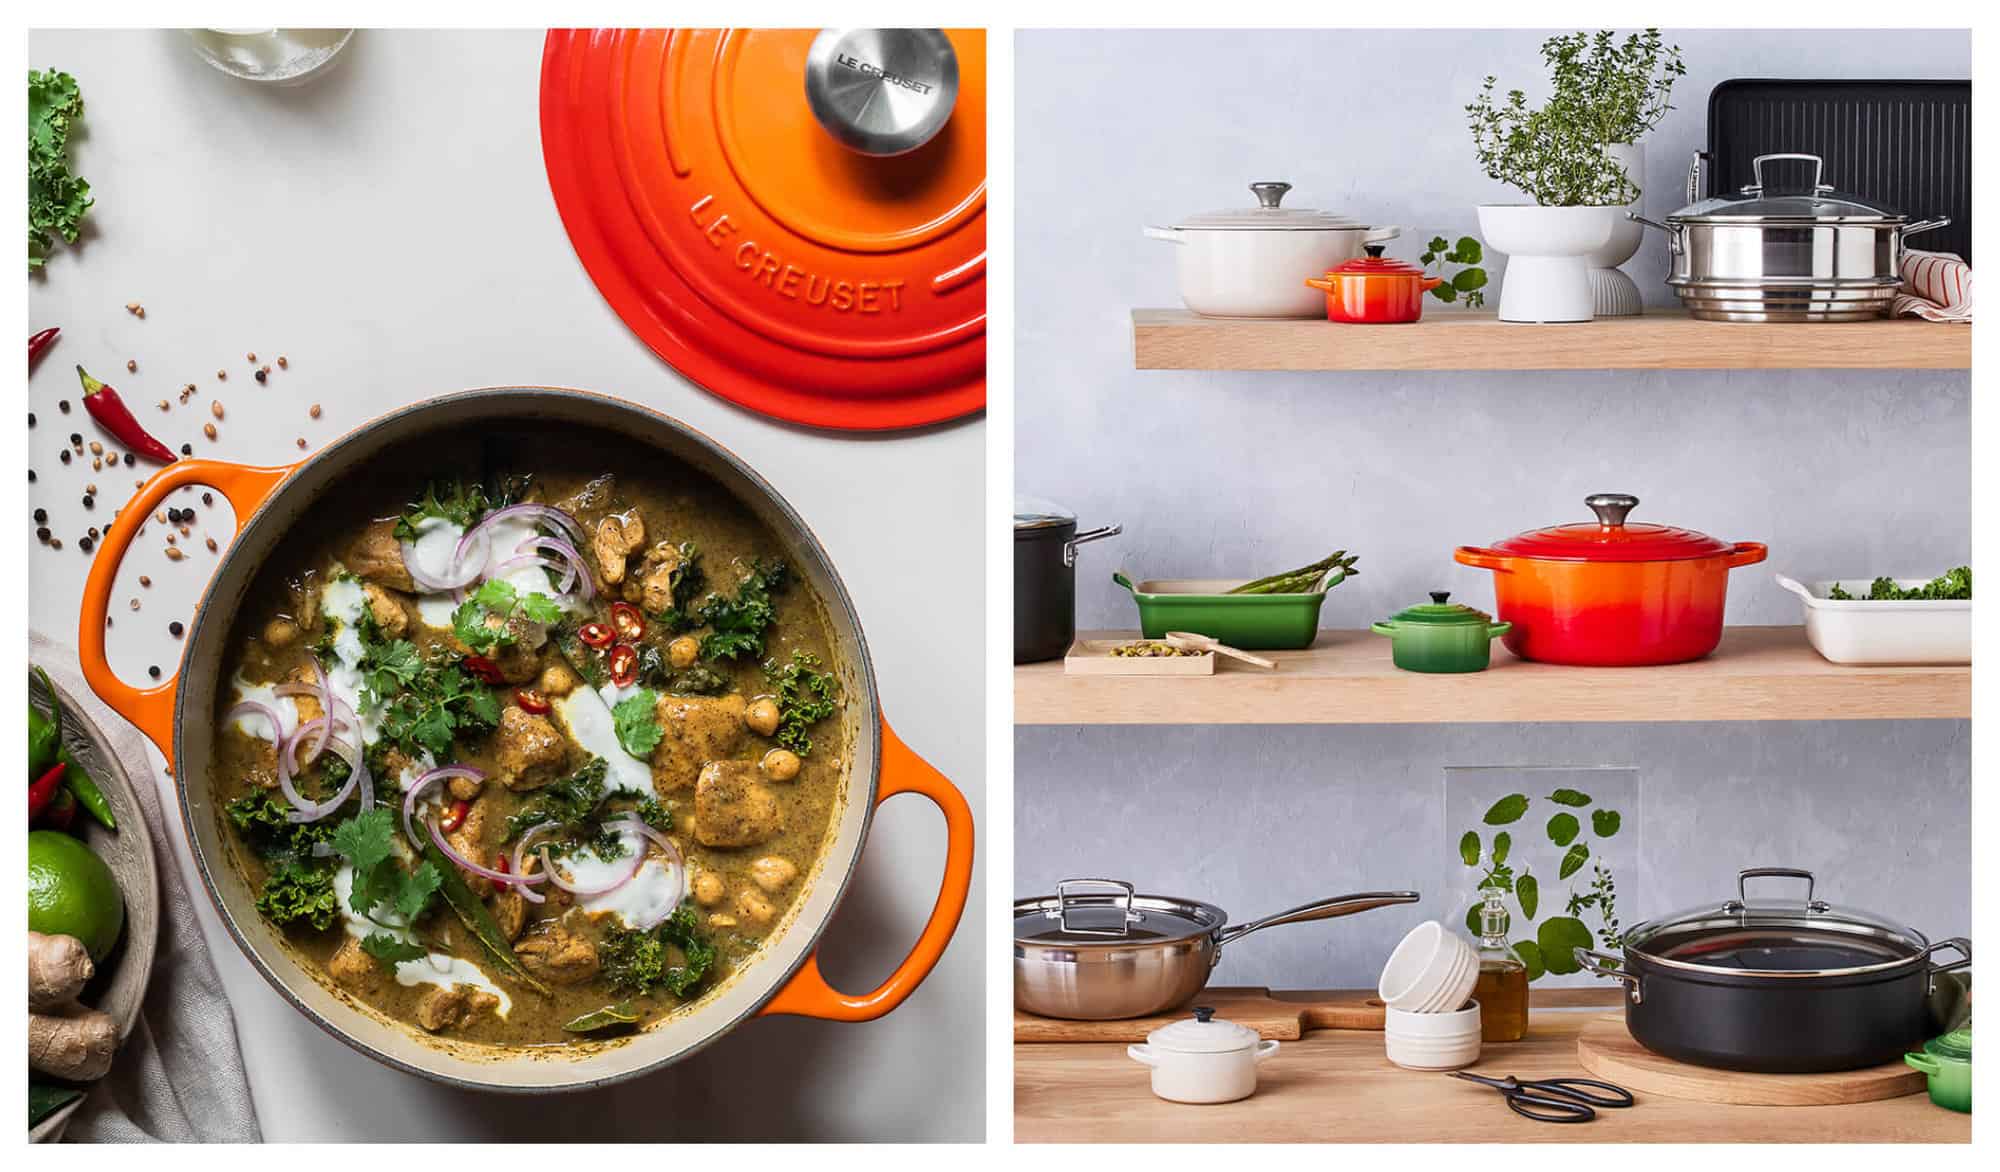 Left: An orange Le Creuset cooking dish is pictured with a chickpea curry inside. Right: Various Le Creuset kitchenware (casserole dishes, baking dishes, frying pans) are displayed on a wooden shelf